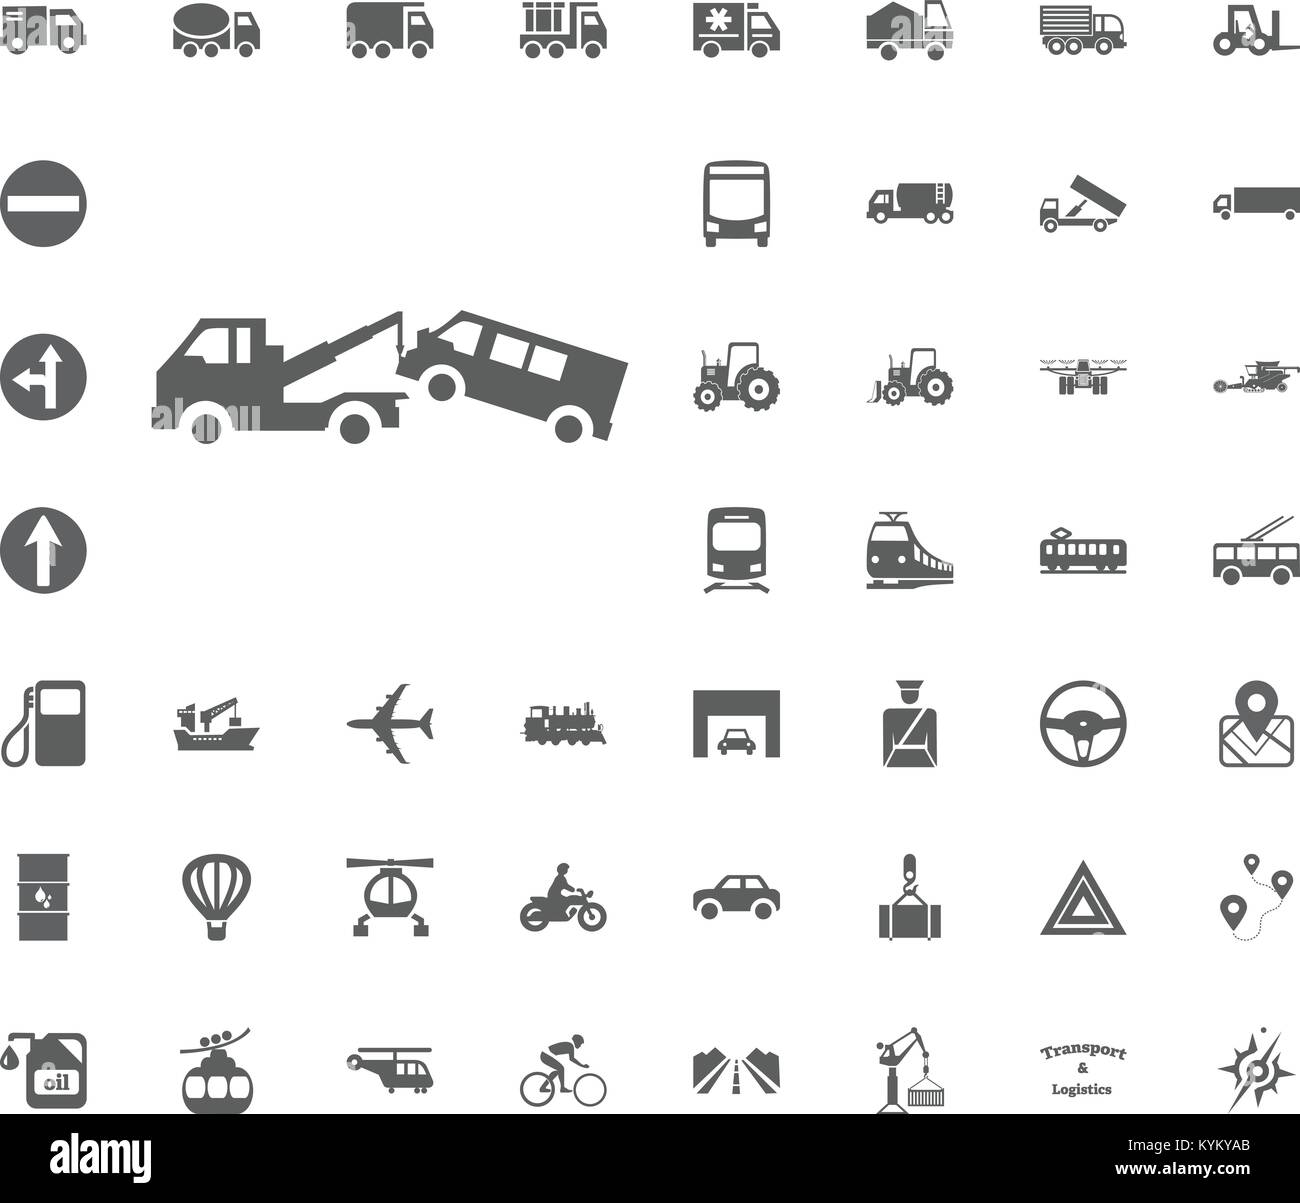 Wrecker icon. Transport and Logistics set icons. Transportation set icons. Stock Vector